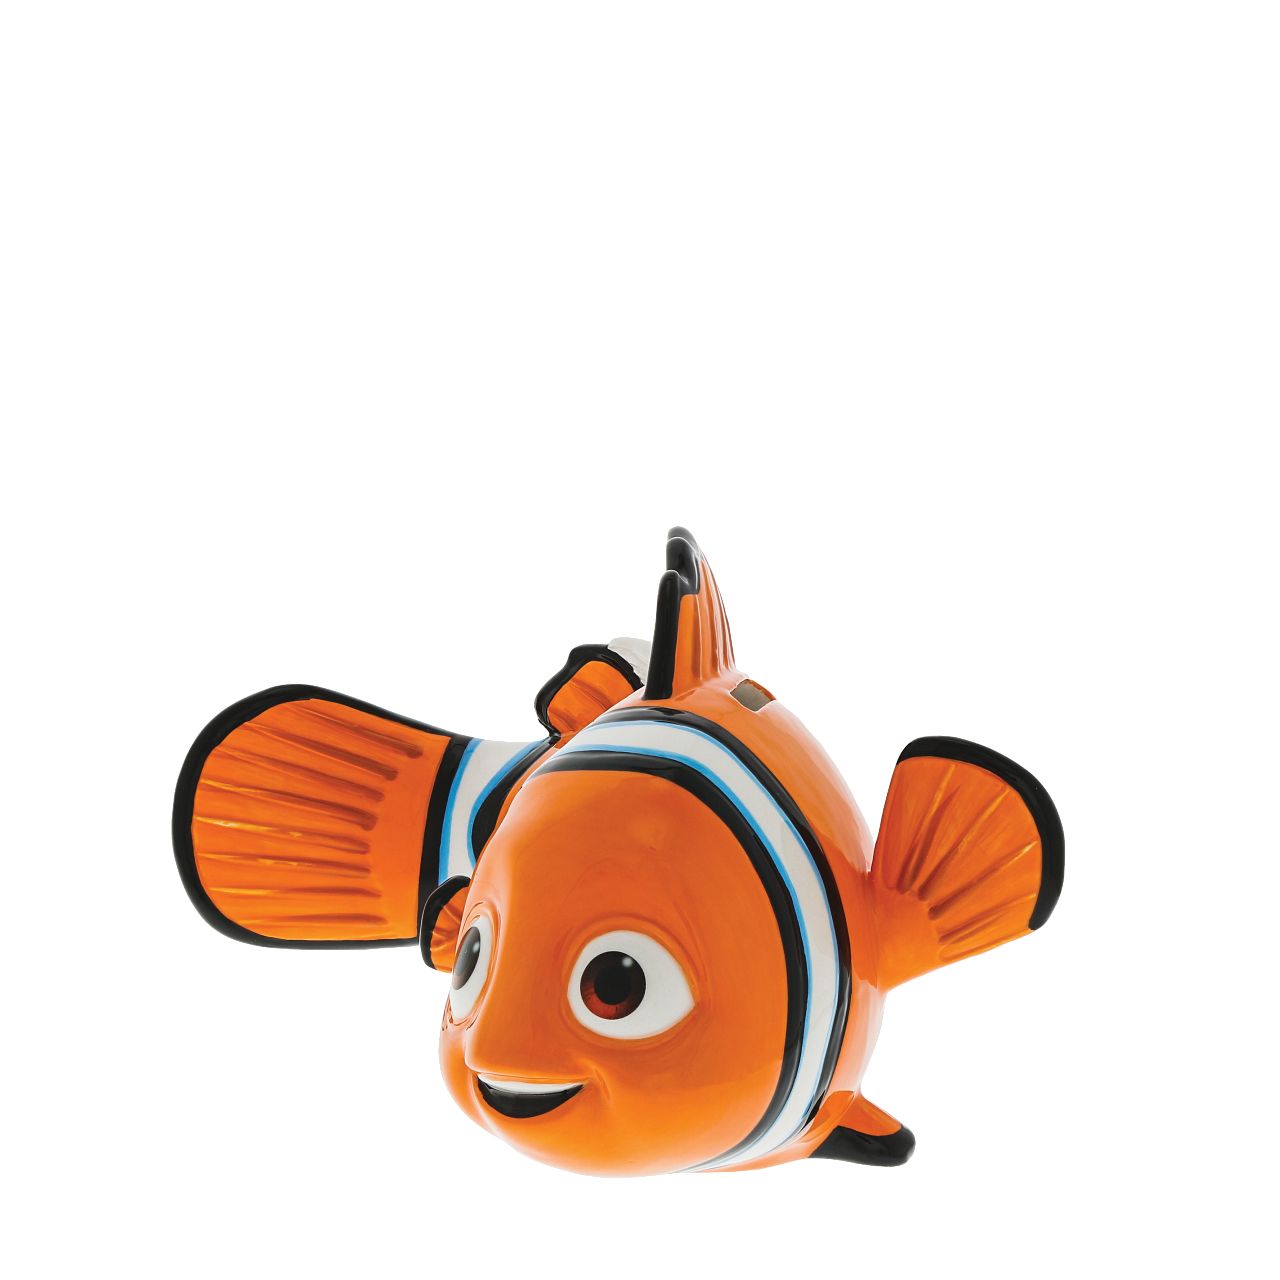 Sharkbait Finding Nemo Money Bank  Featured here is the energetic young clownfish, Sharkbait trying to get back home to the reef and his dad. Save all your pennies is this beautifully sculpted Finding Nemo money bank. The perfect gift for any pixar fan. This ceramic home accessory is only available from the Enchanting Disney Collection.